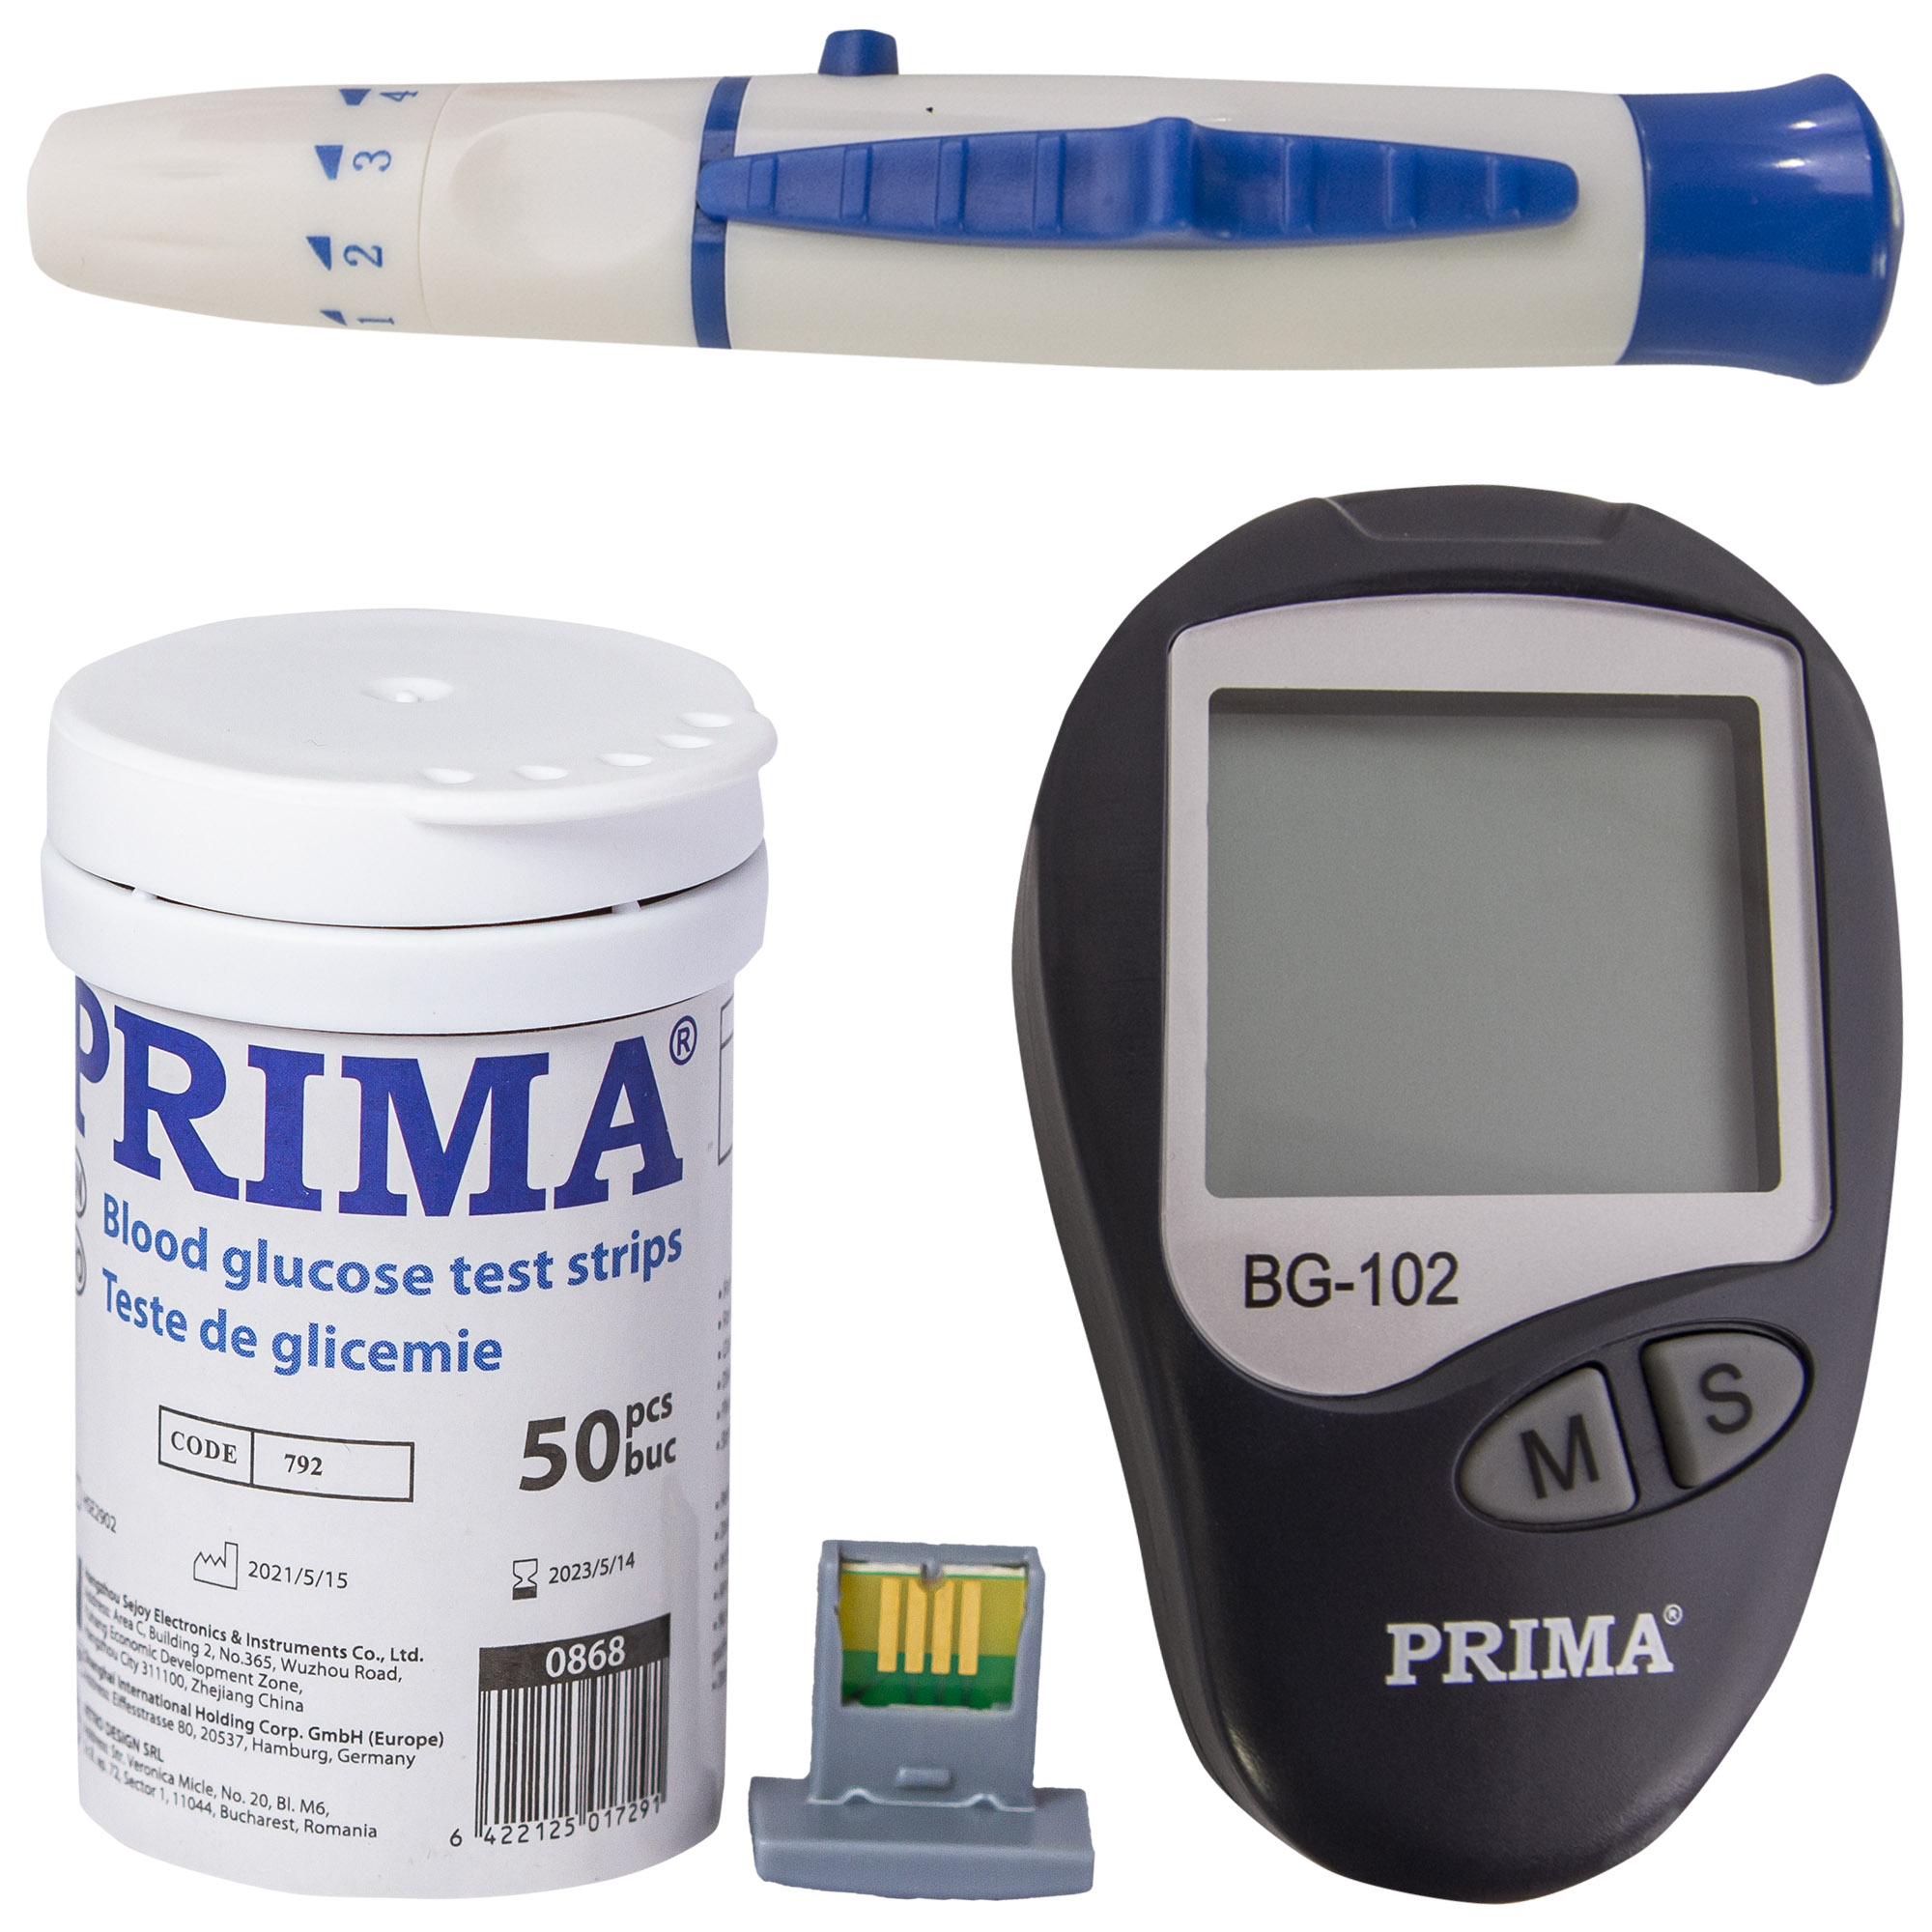 Medical practice/HEALTH MONITORING DEVICES/Glucometer and Blood Glucose Tests